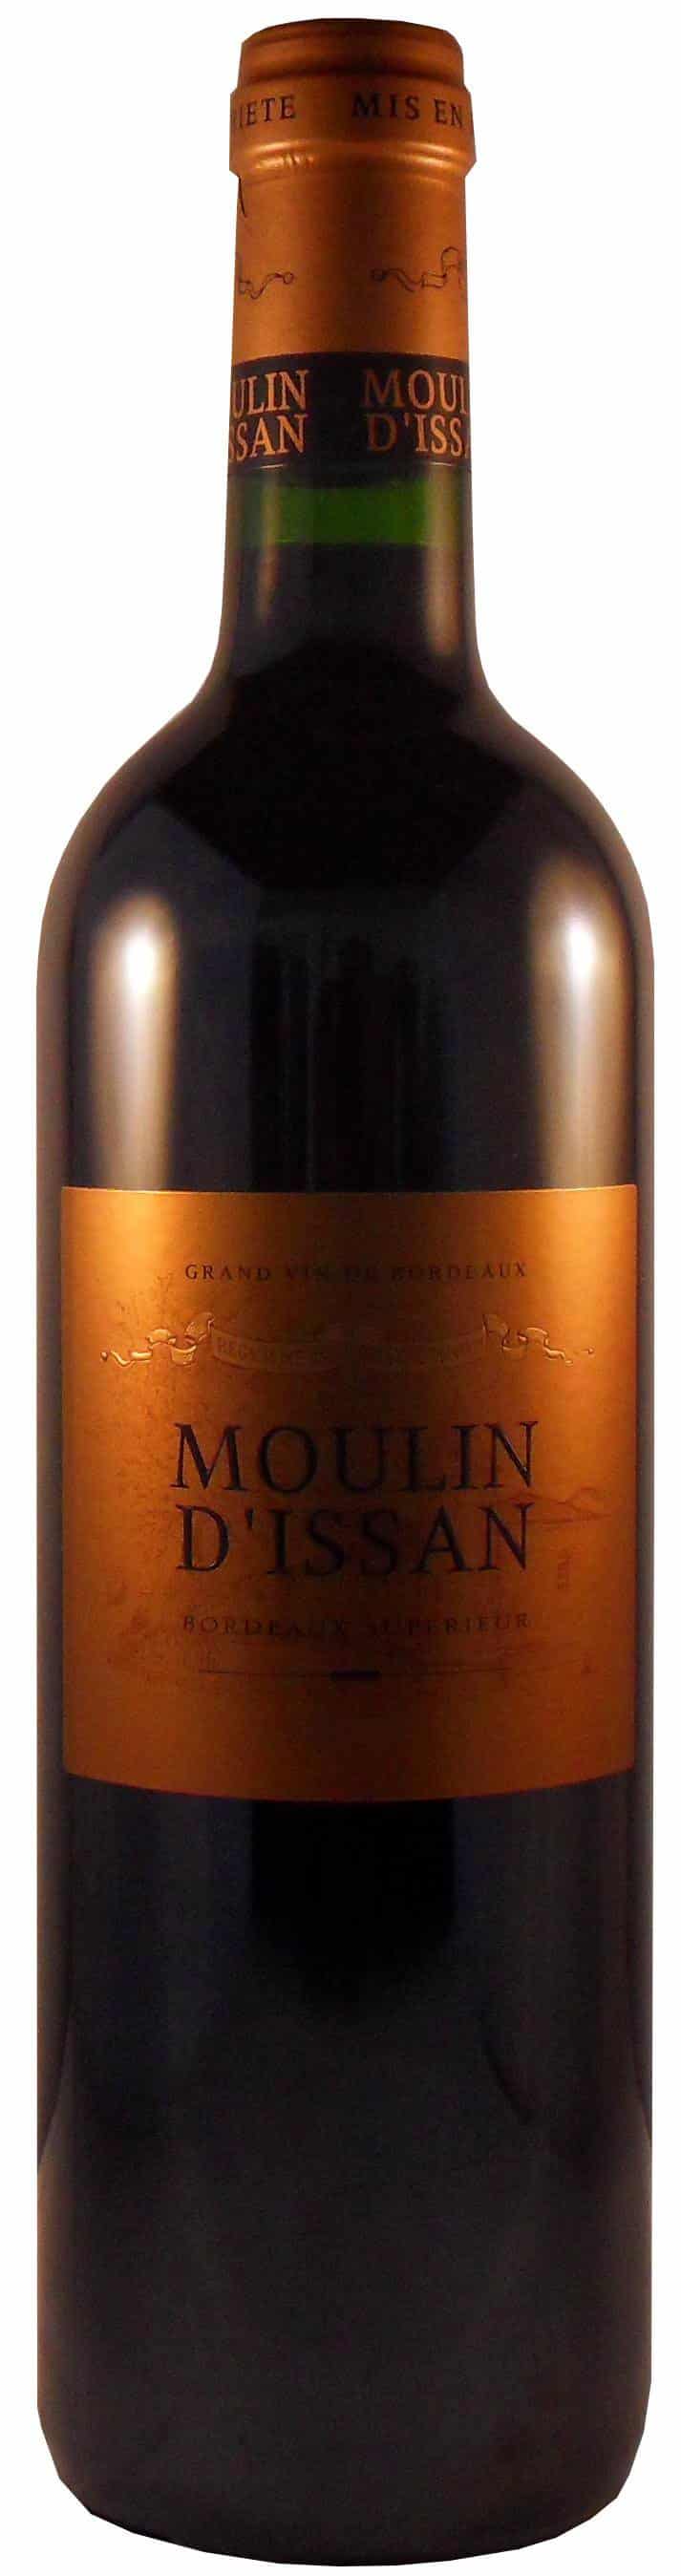 Moulin d'Issan